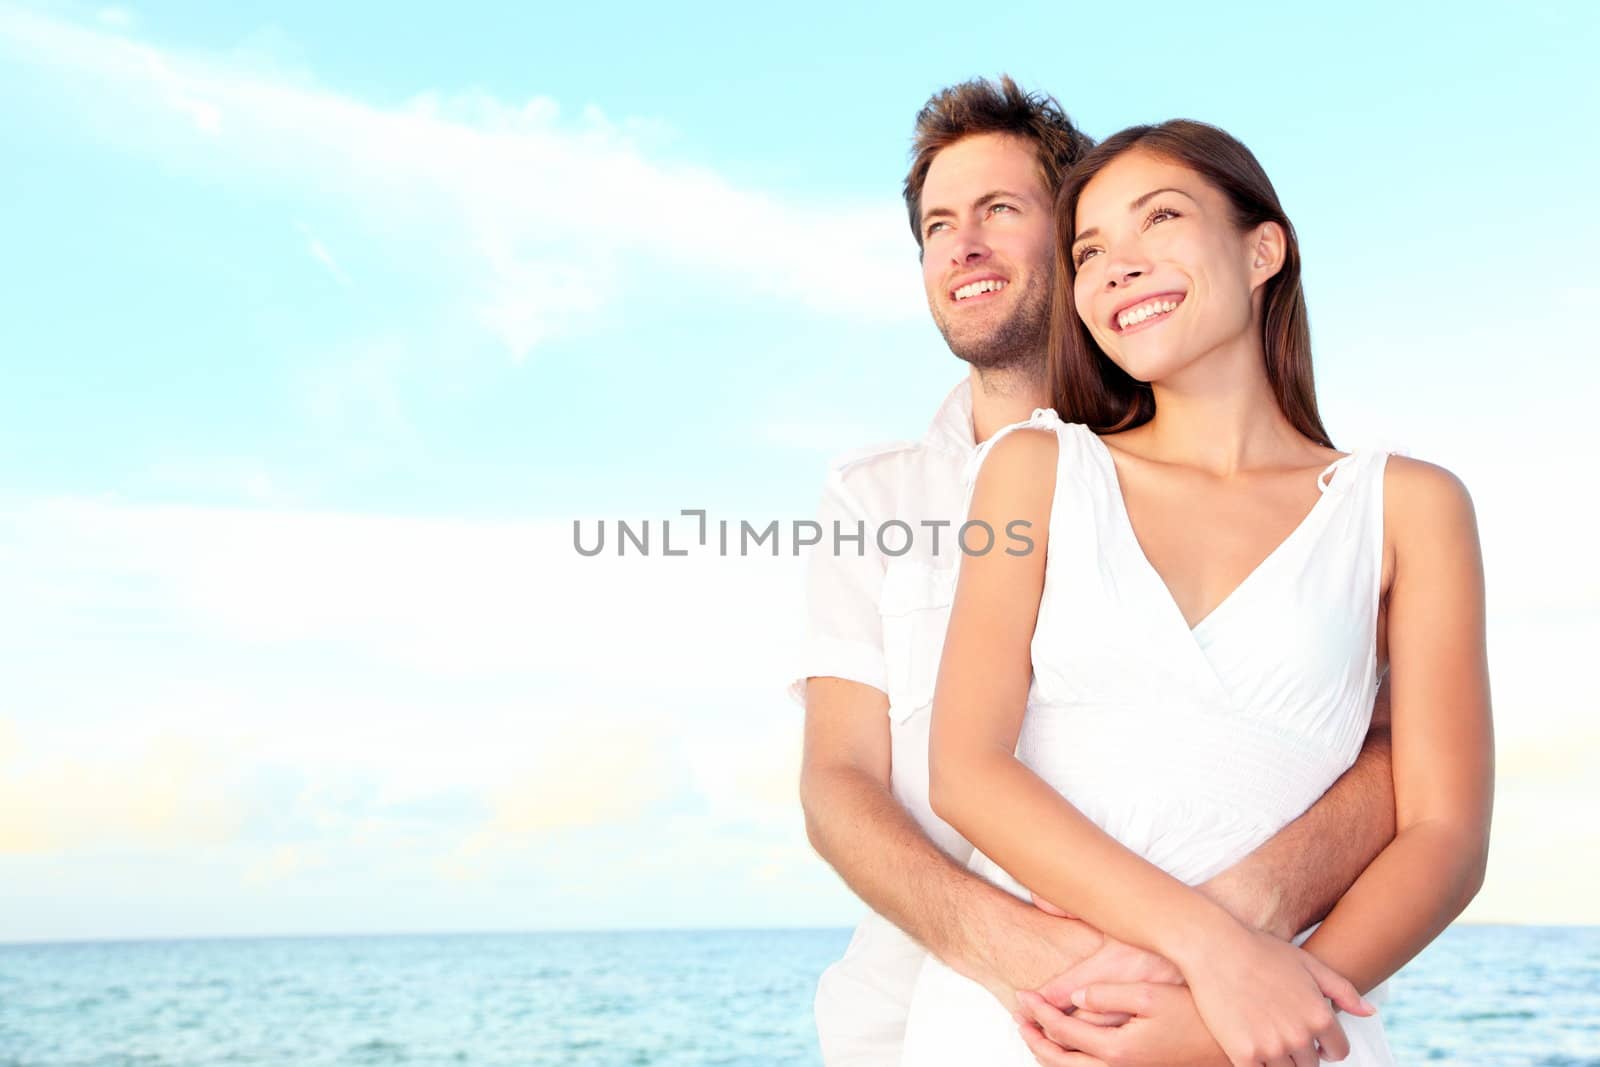 Happy beach couple portrait of beautiful young romantic interracial couple smiling happy embracing on beach during summer vacation. Caucasian man, Asian woman.